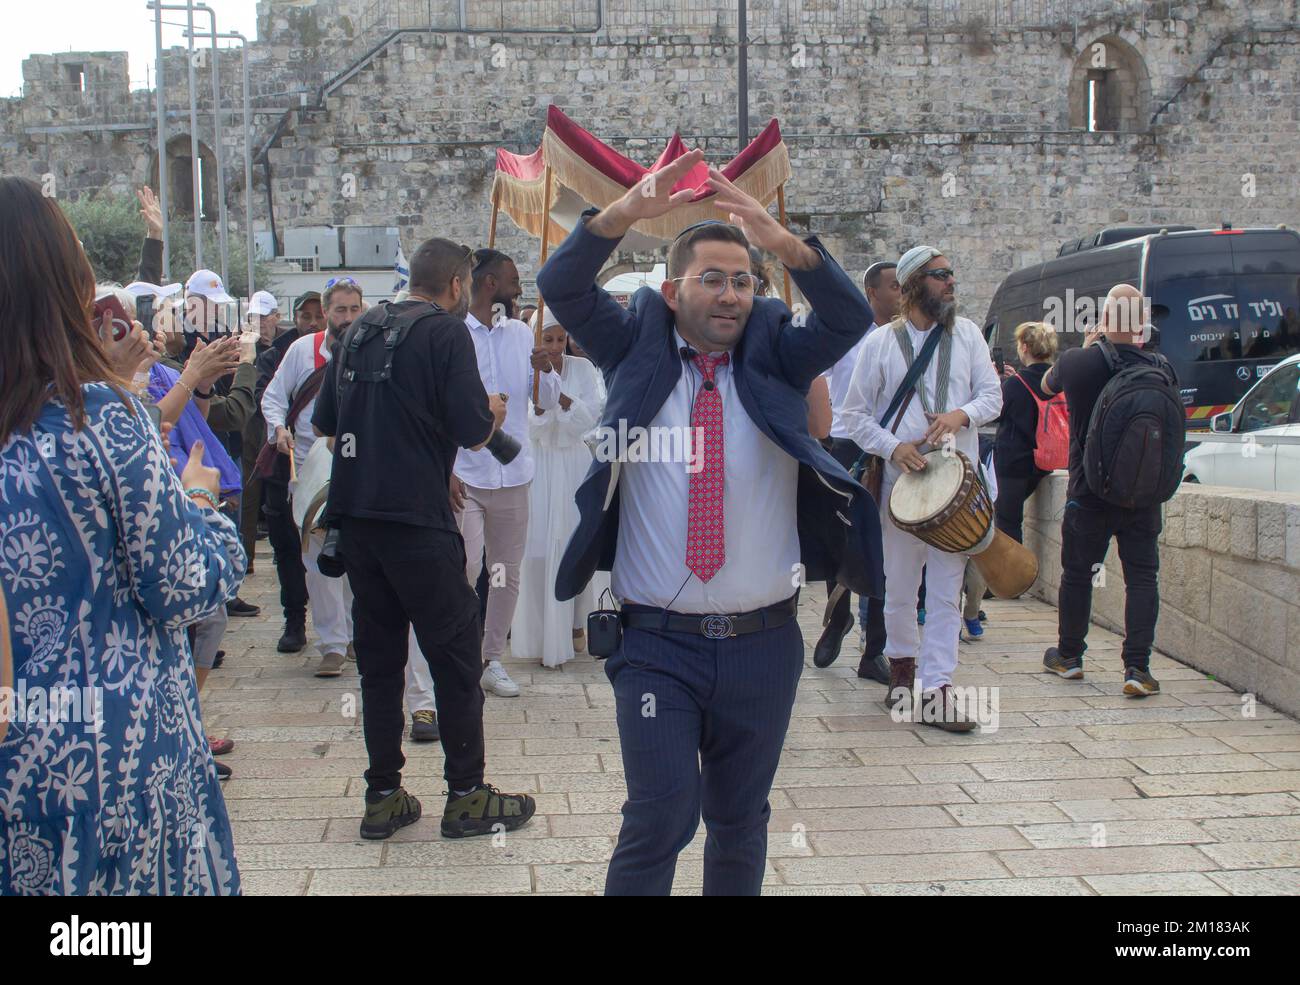 10 Nov 2022 A Rabbi leading family and friends at a Bar Mitzvah celebration near the Jaffa Gate as the party makes its way to the Western Wall and the Stock Photo